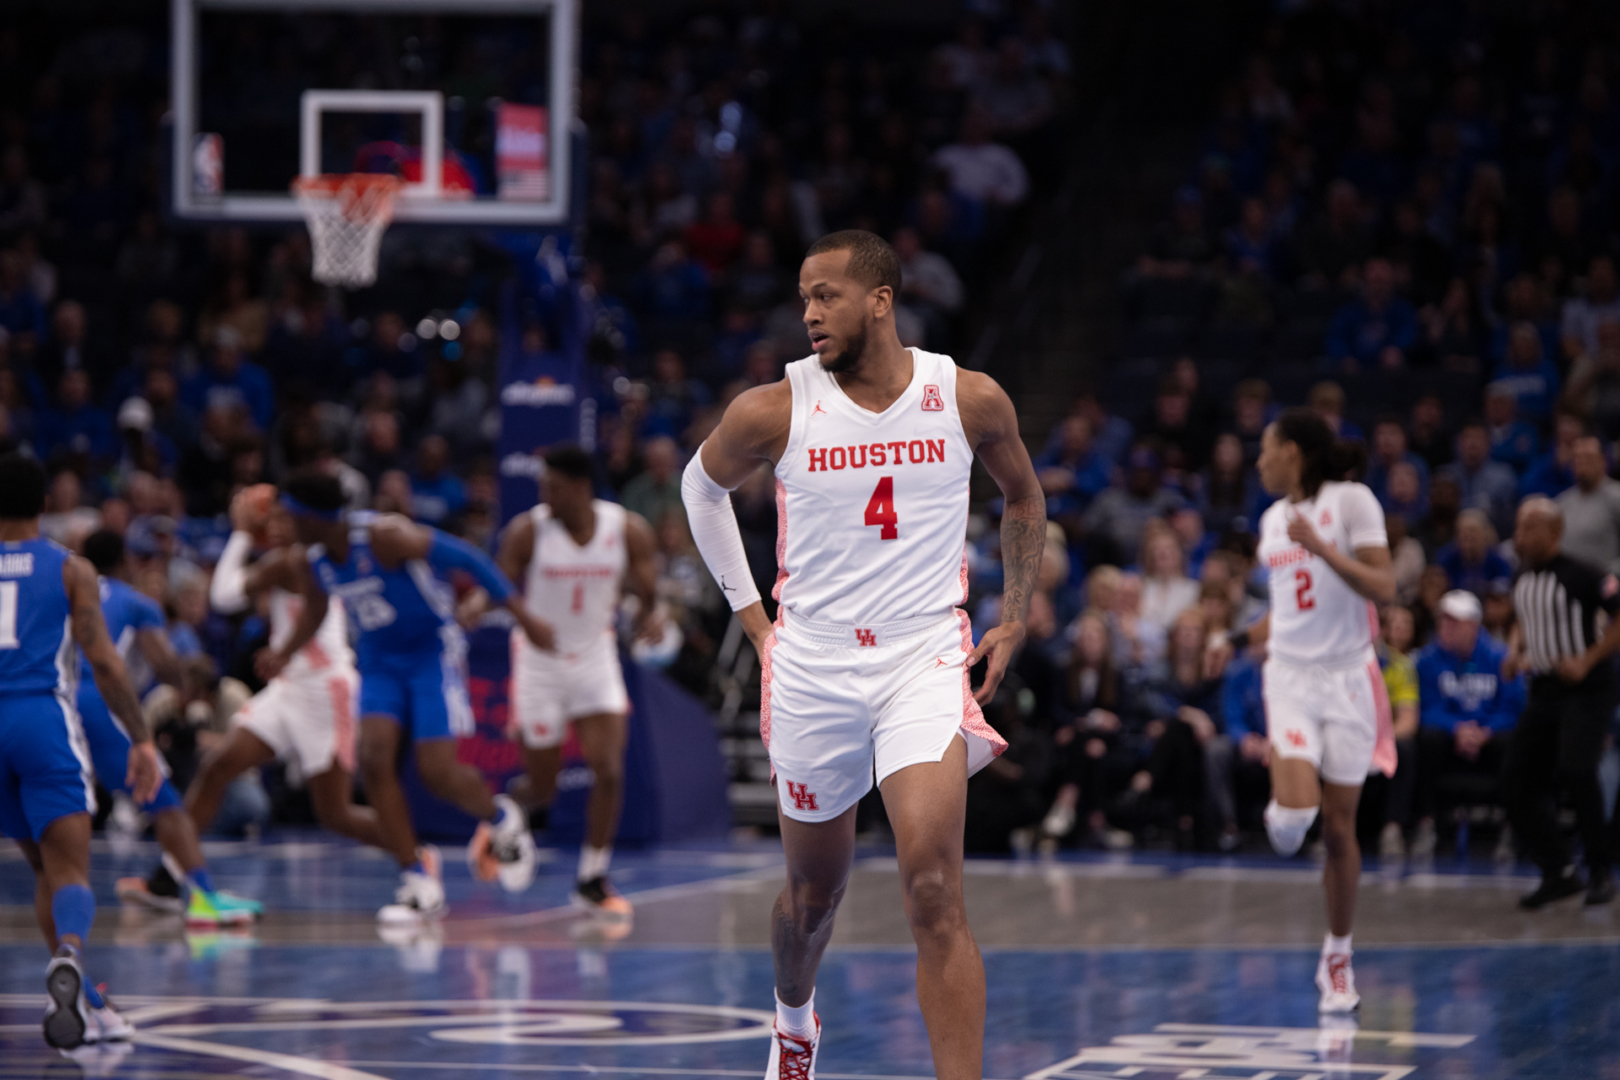 UH forward Justin Gorham in a game against the Memphis Tigers during the 2019-20 season at the FedEx Forum. | Kathryn Lenihan/The Cougar